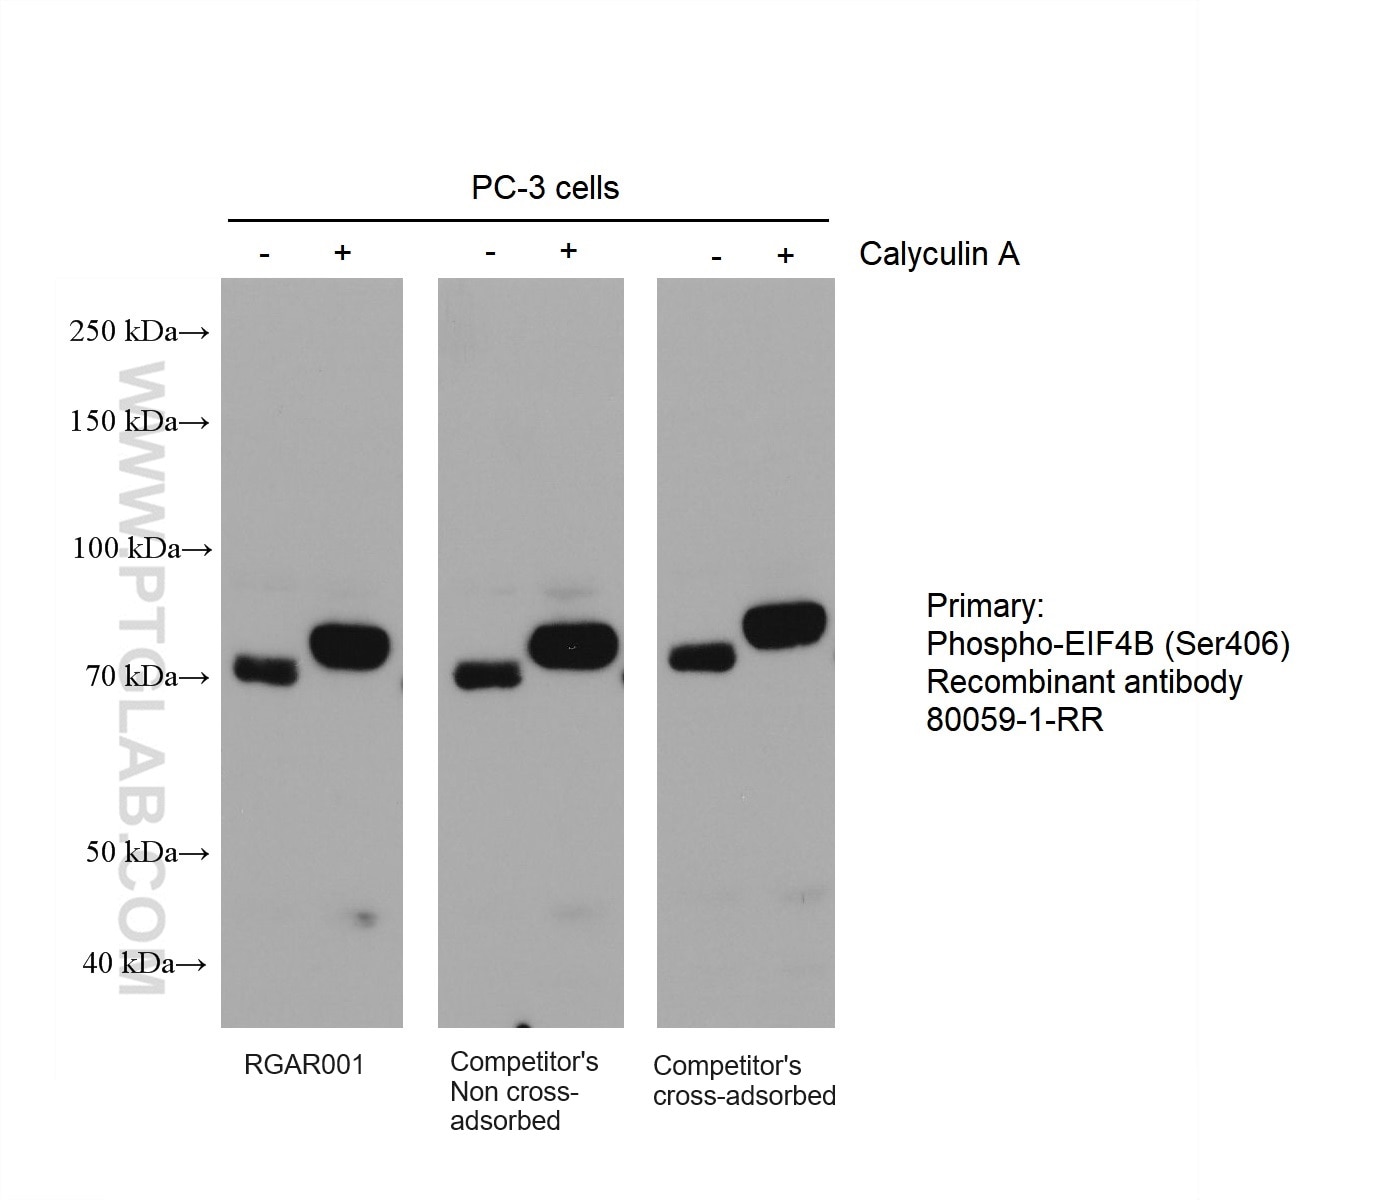 PC-3 and Calyculin A treated PC-3 cell lysates were subjected to SDS-PAGE followed by western blot with rabbit anti-Phospho-EIF4B (Ser406) Recombinant antibody (80059-1-RR) at dilution of 1:20000. Multi-rAb HRP-Goat Anti-Rabbit Recombinant Secondary Antibody (H+L) (RGAR001), leading competitor’s non cross-adsorbed and cross-adsorbed secondary antibodies were all used at 0.05μg/mL for detection. 